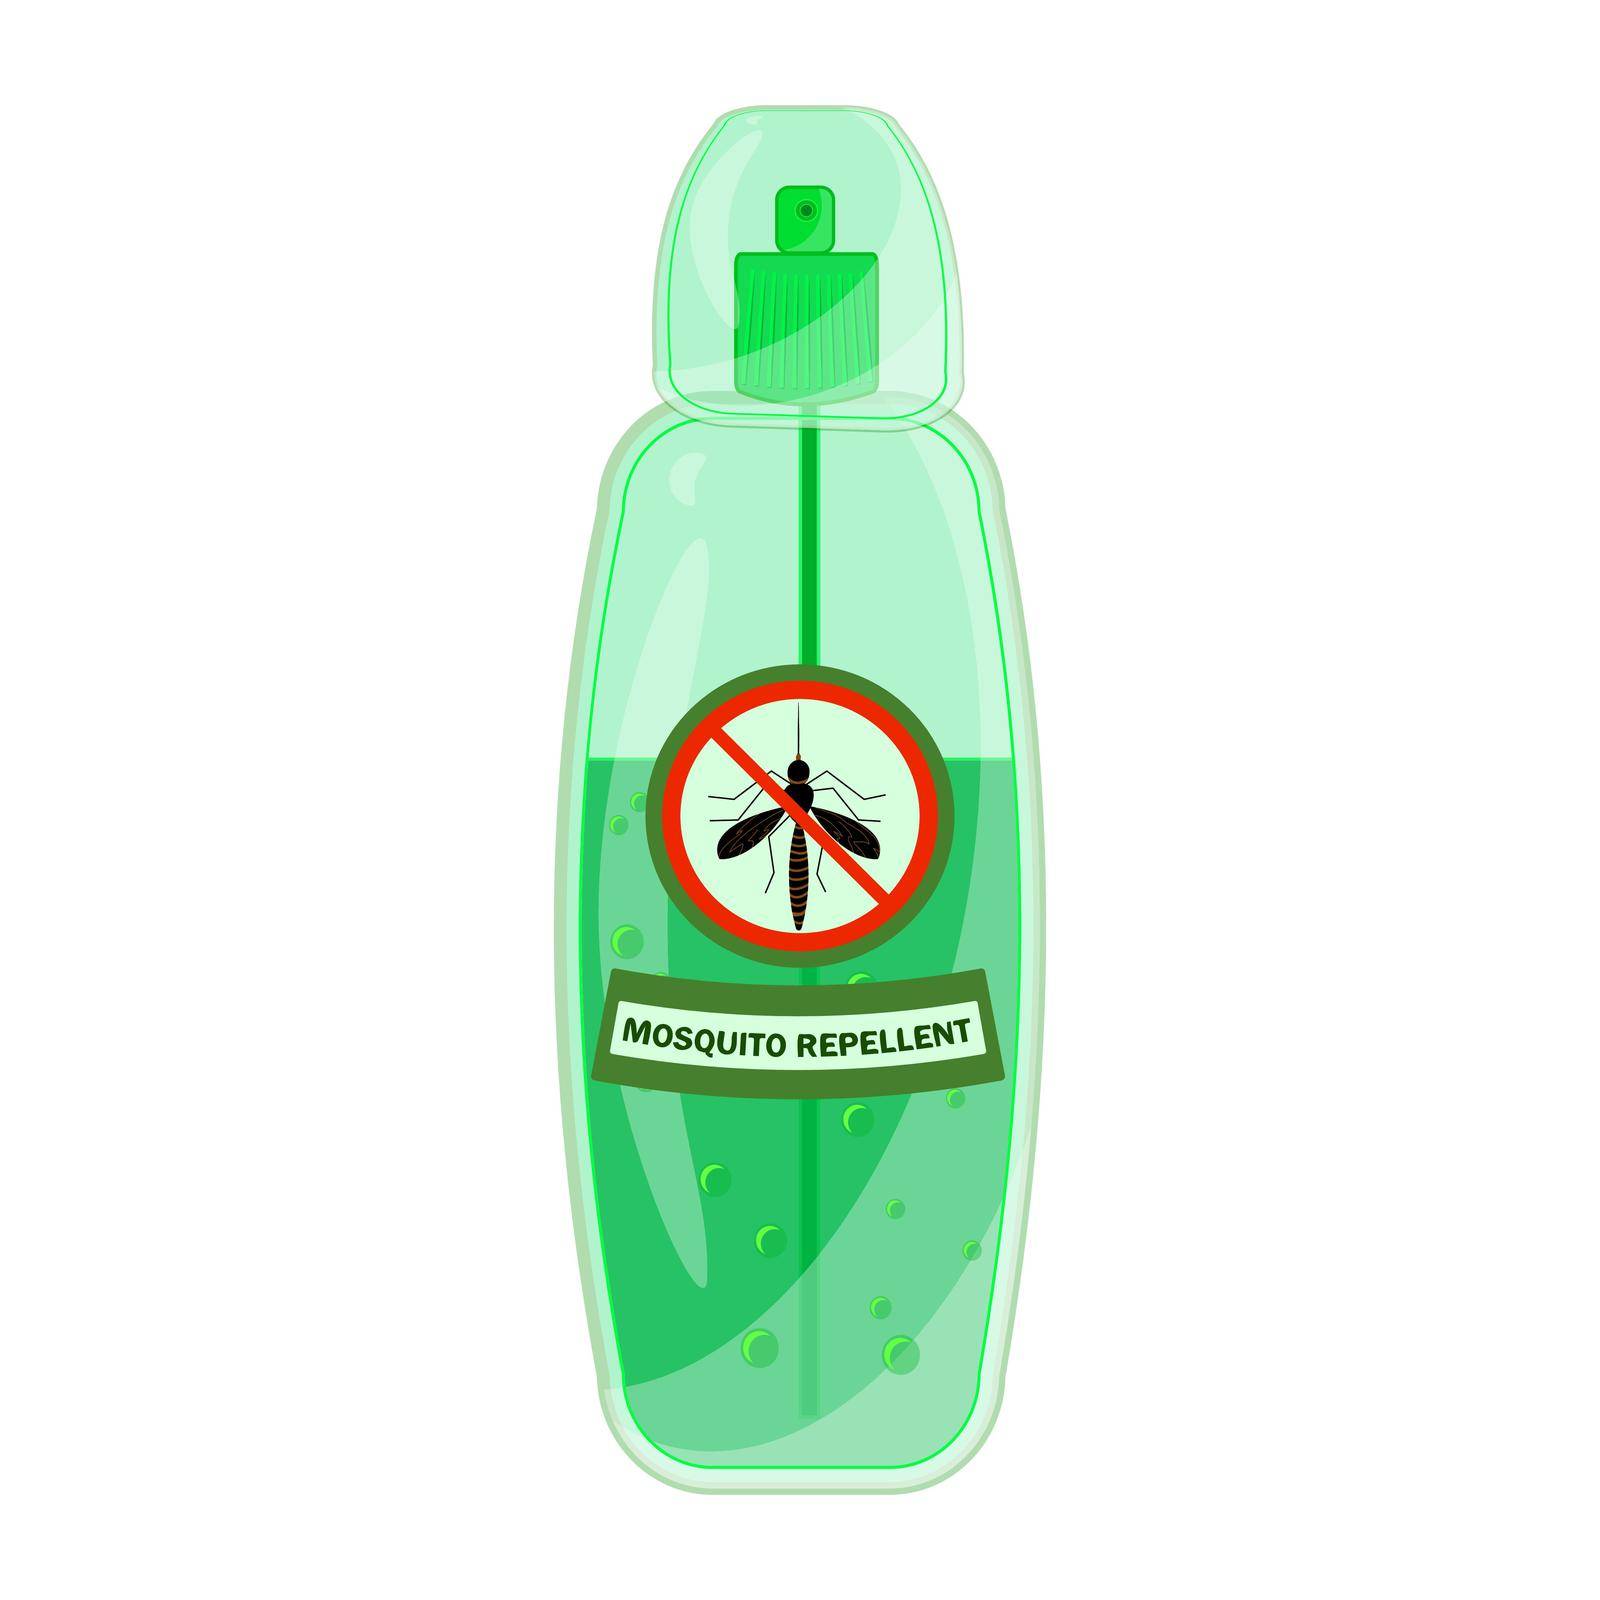 Mosquito repellent isolated on white background. Mosquito repellent bottle spray with pest stop sign. by KajaNi